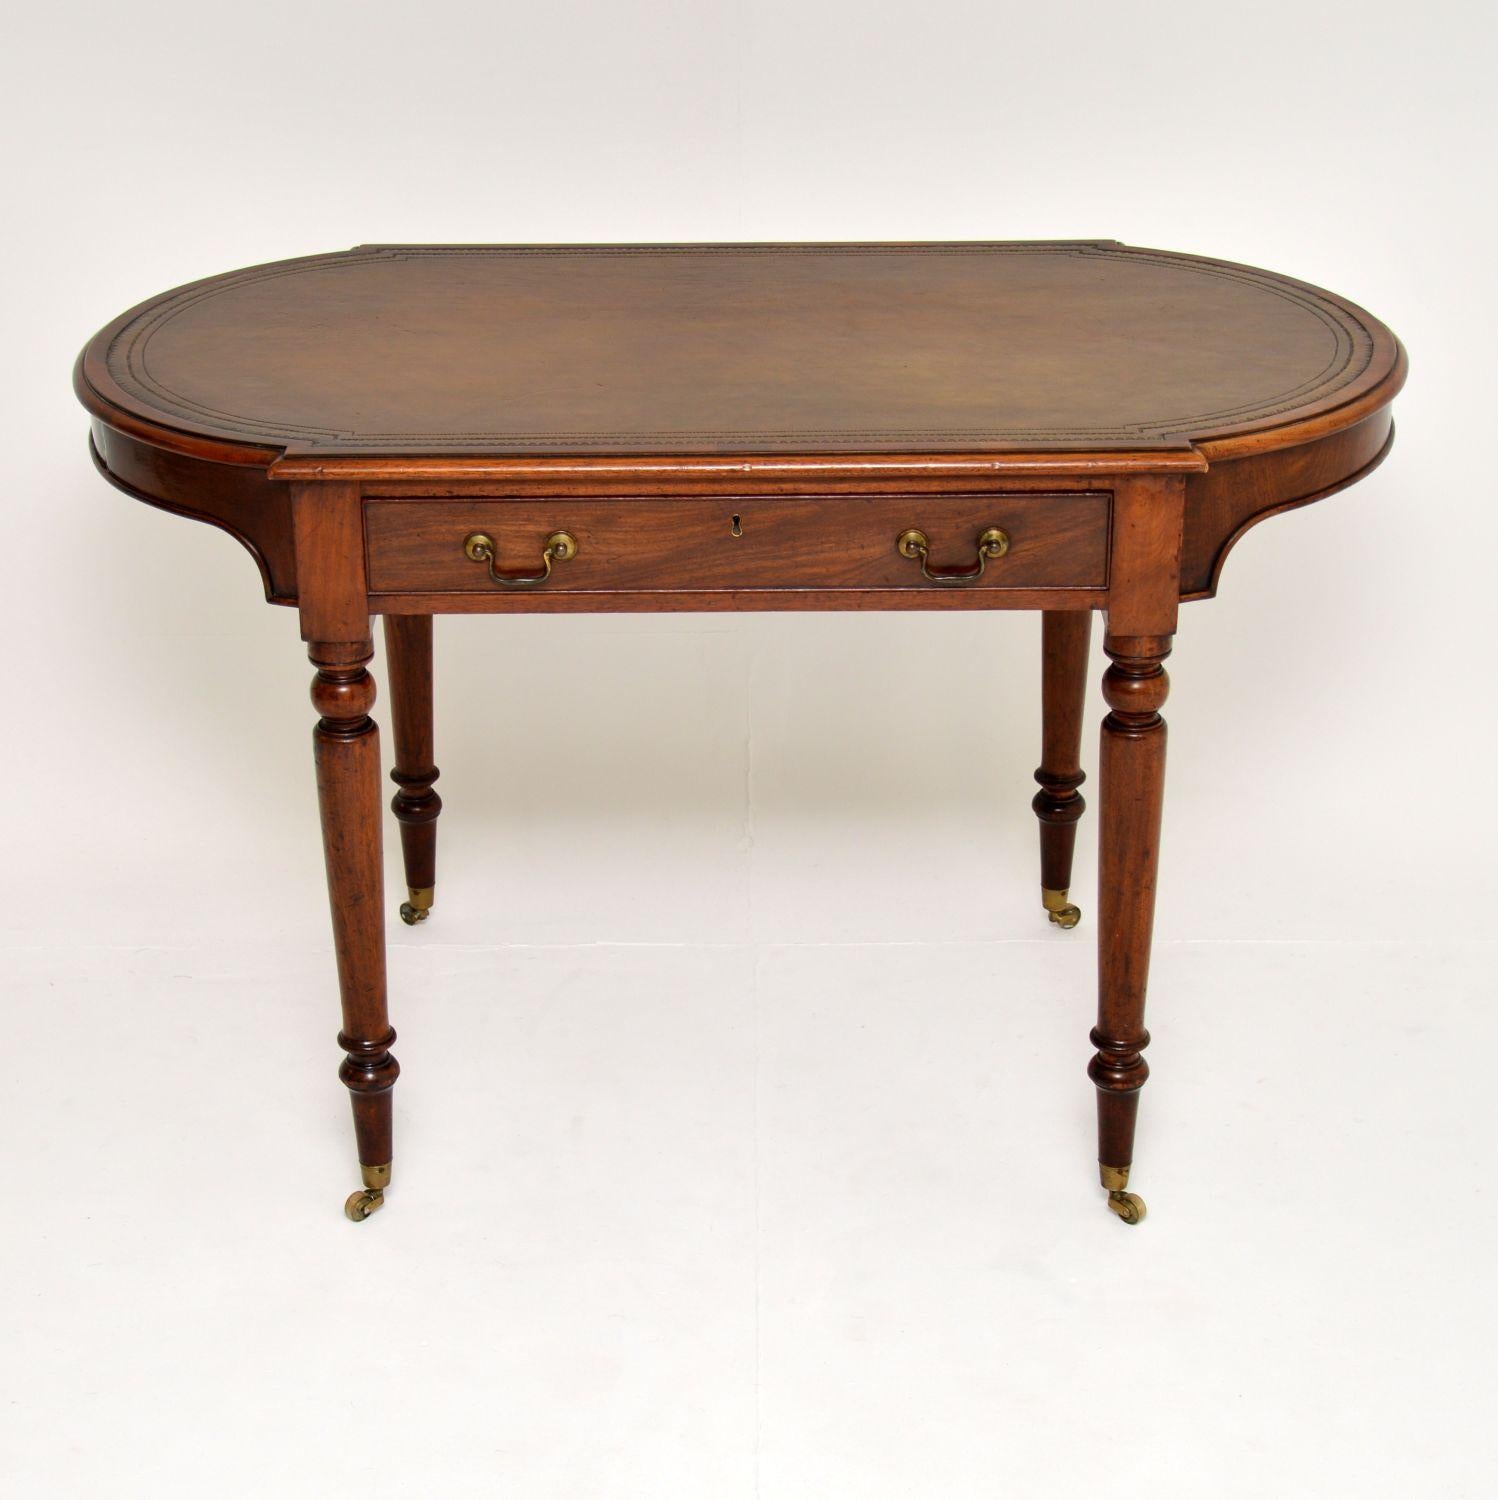 A fantastic original Victorian period writing table in mahogany, with an inset leather top. This dates from circa 1850-1860 period.

This has an unusual oval shape design, it is of amazing quality and is wonderful condition for its age. We have